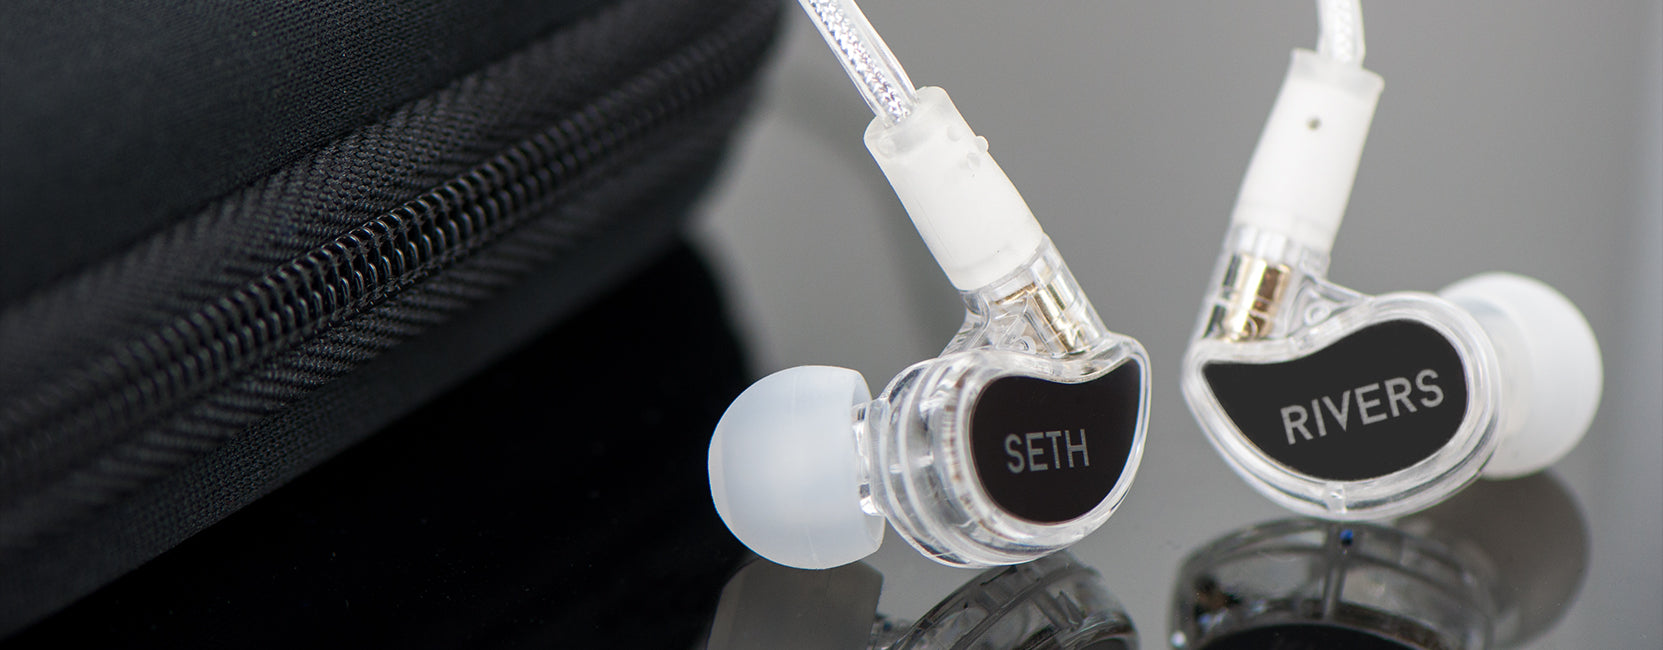 Two custom in-ear monitors with clear casings labeled "seth" and "rivers" placed in front of a black case on a reflective surface.